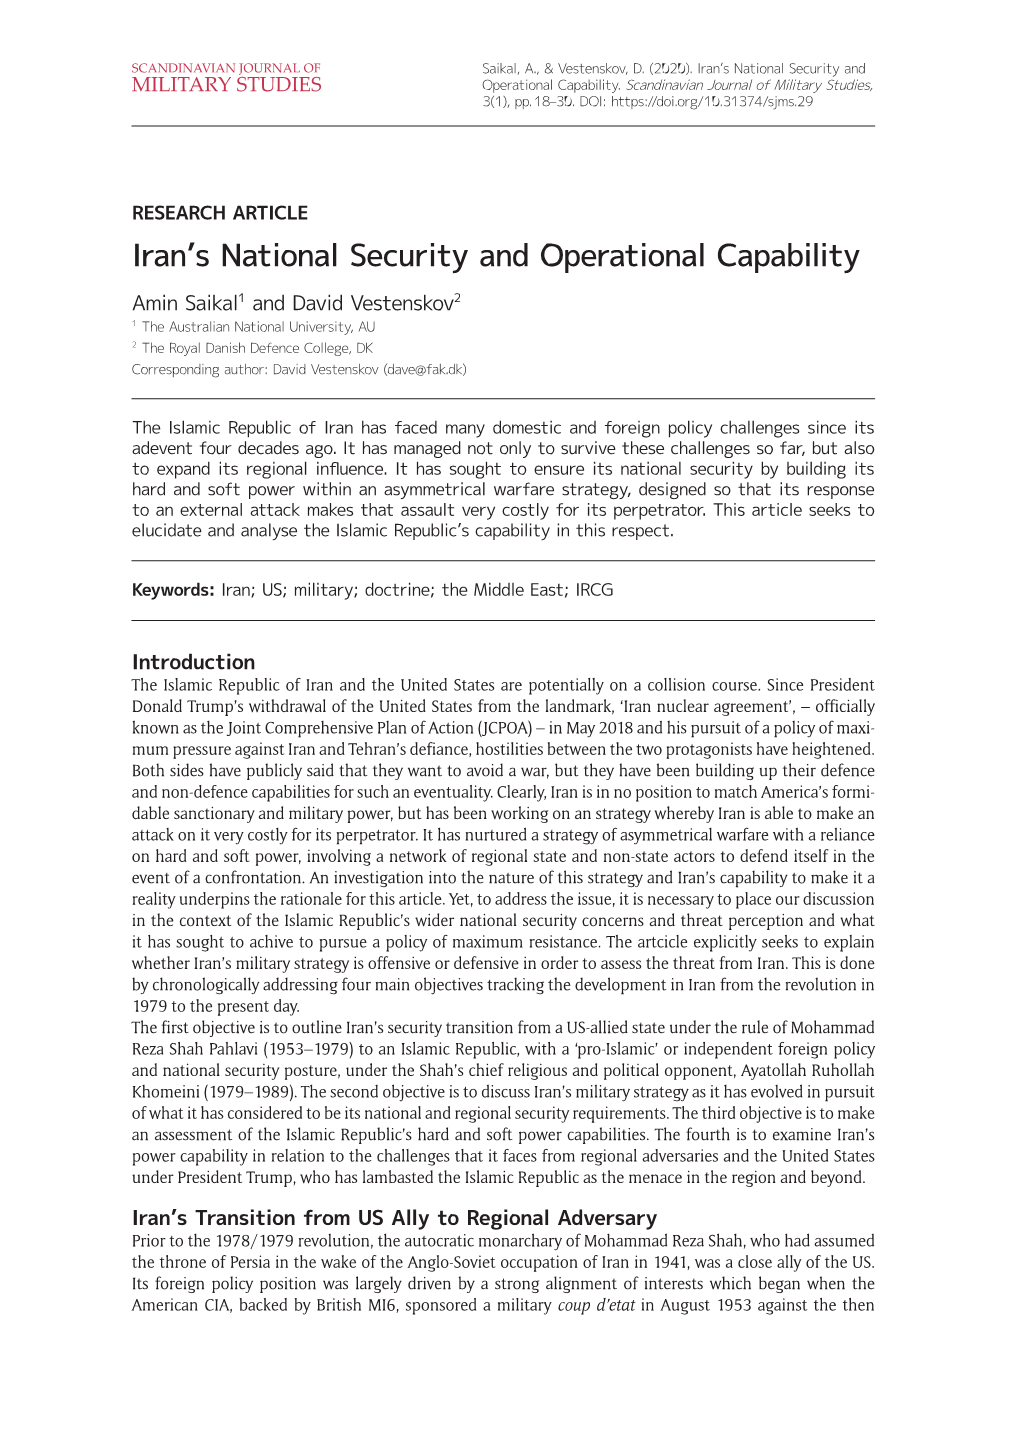 Iran's National Security and Operational Capability